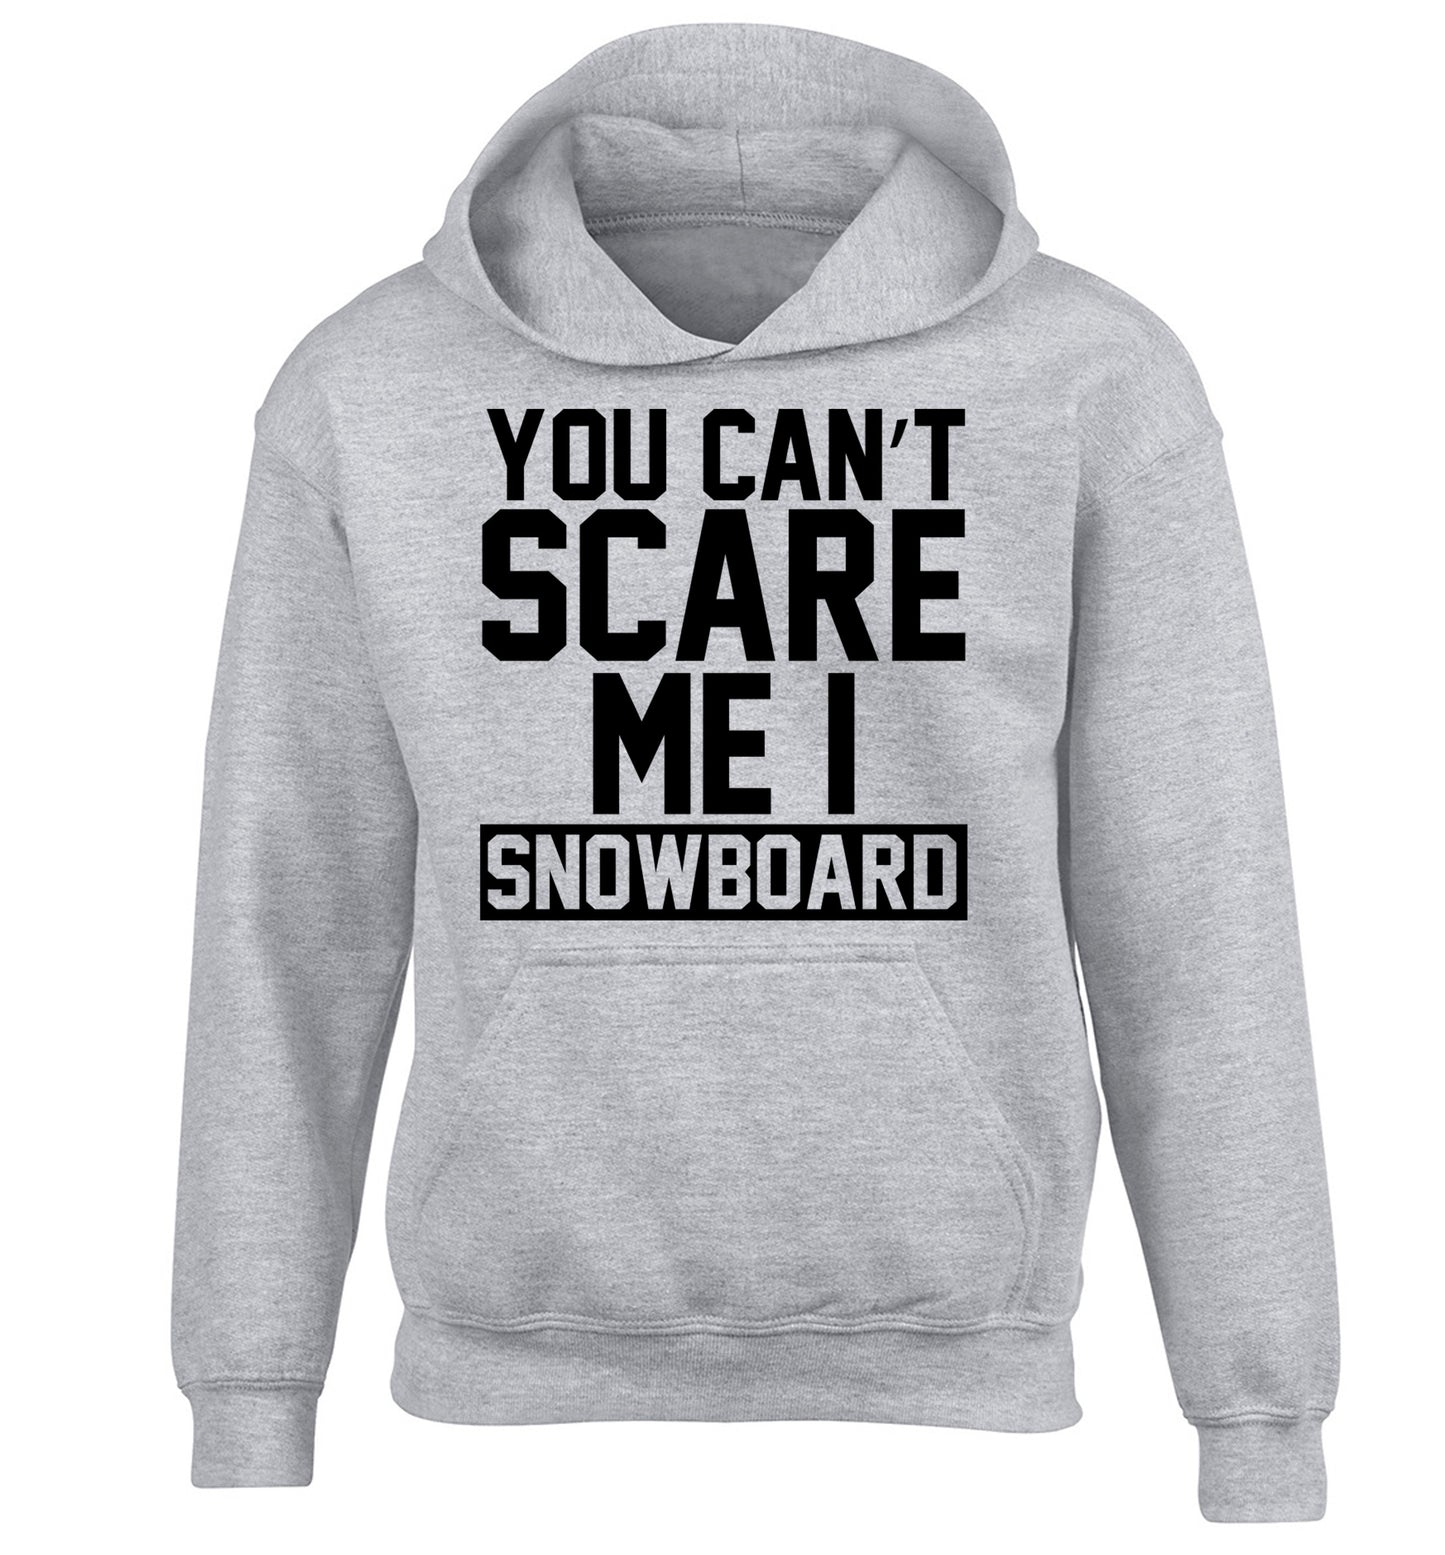 You can't scare me I snowboard children's grey hoodie 12-14 Years